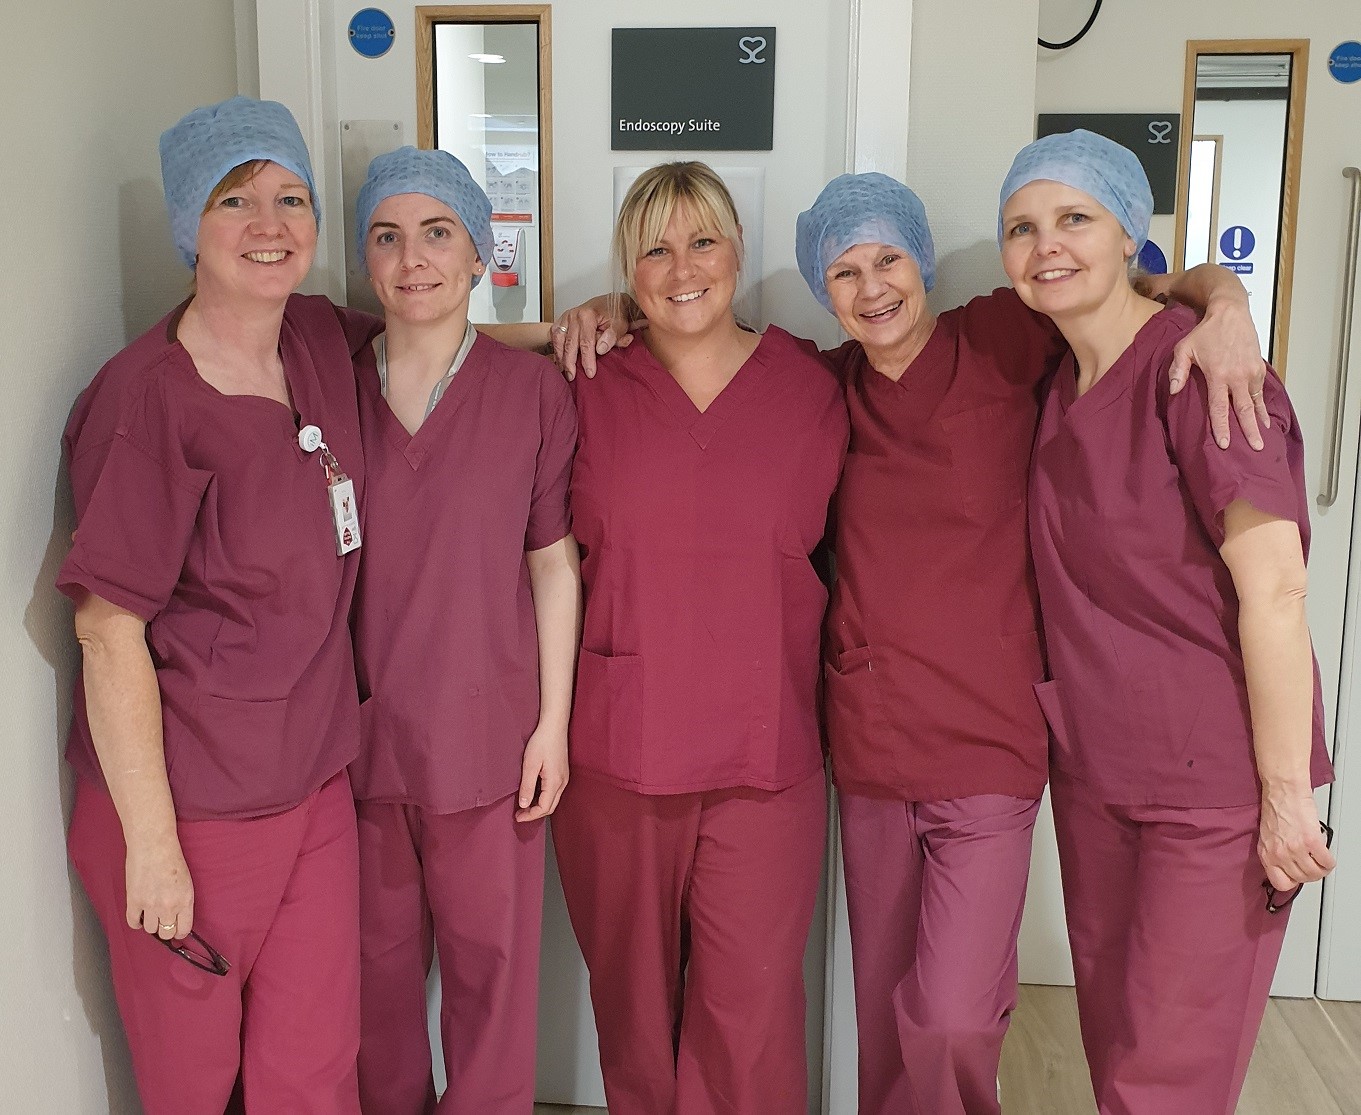 Endoscopy services at Spire Cheshire Hospital receive accreditation from Joint Advisory Group (JAG)